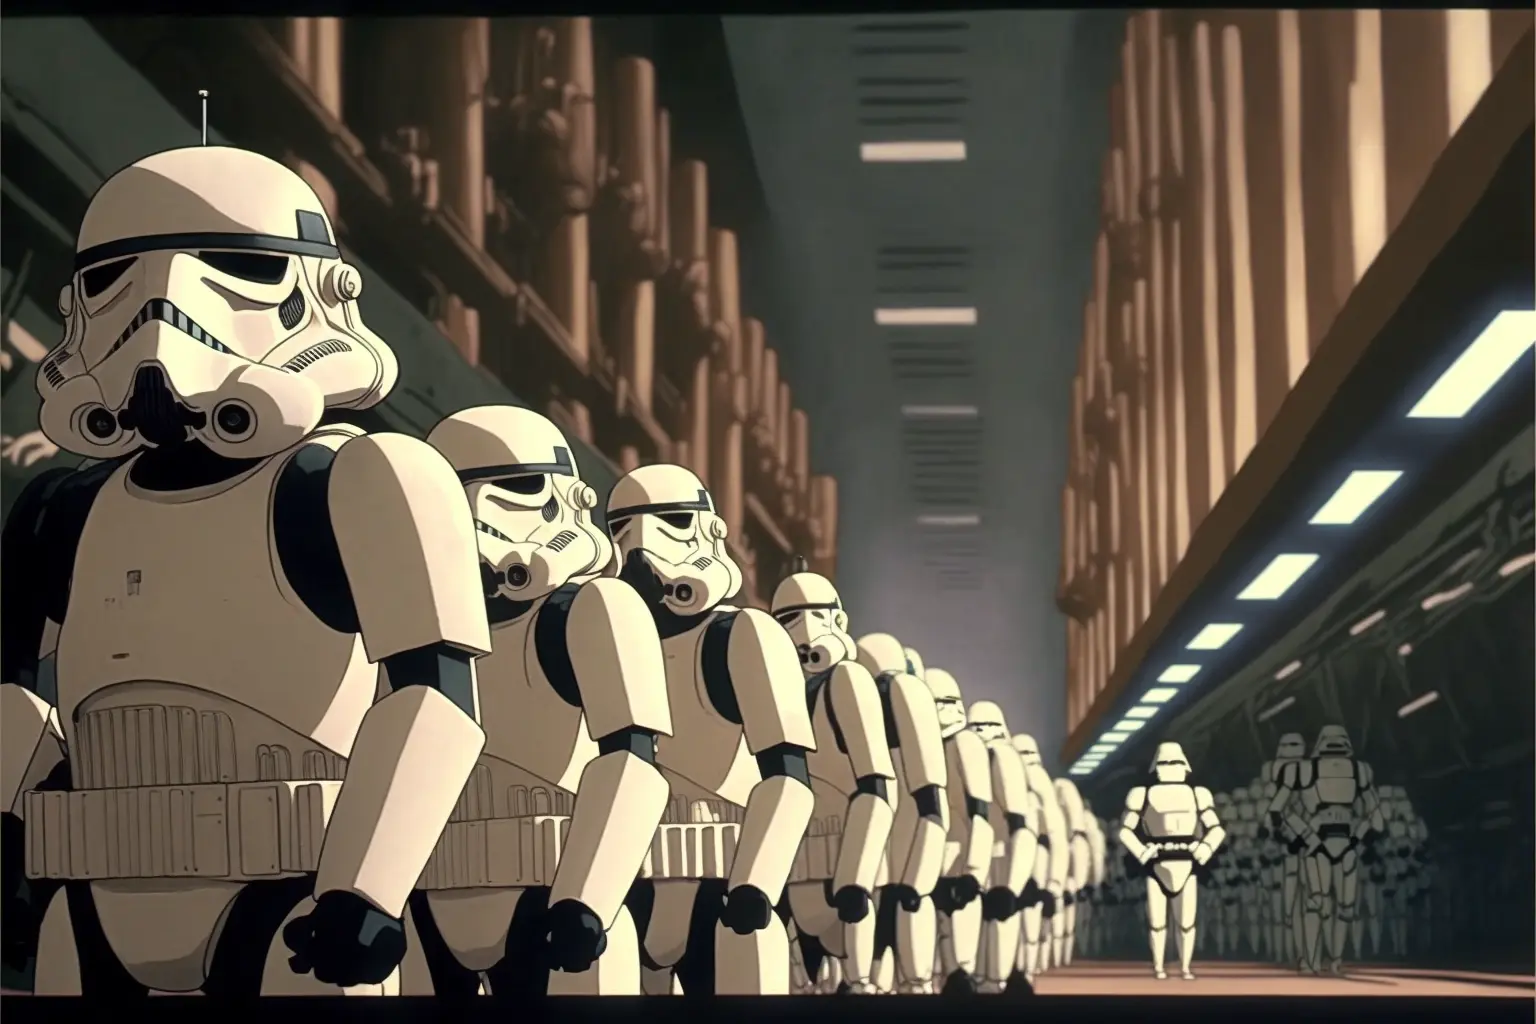 DVD screengrab from studio ghibli movie, stormtroopers marching inside the hangar of an imperior star destroyer, directed by Hayao Miyazaki, retro anime